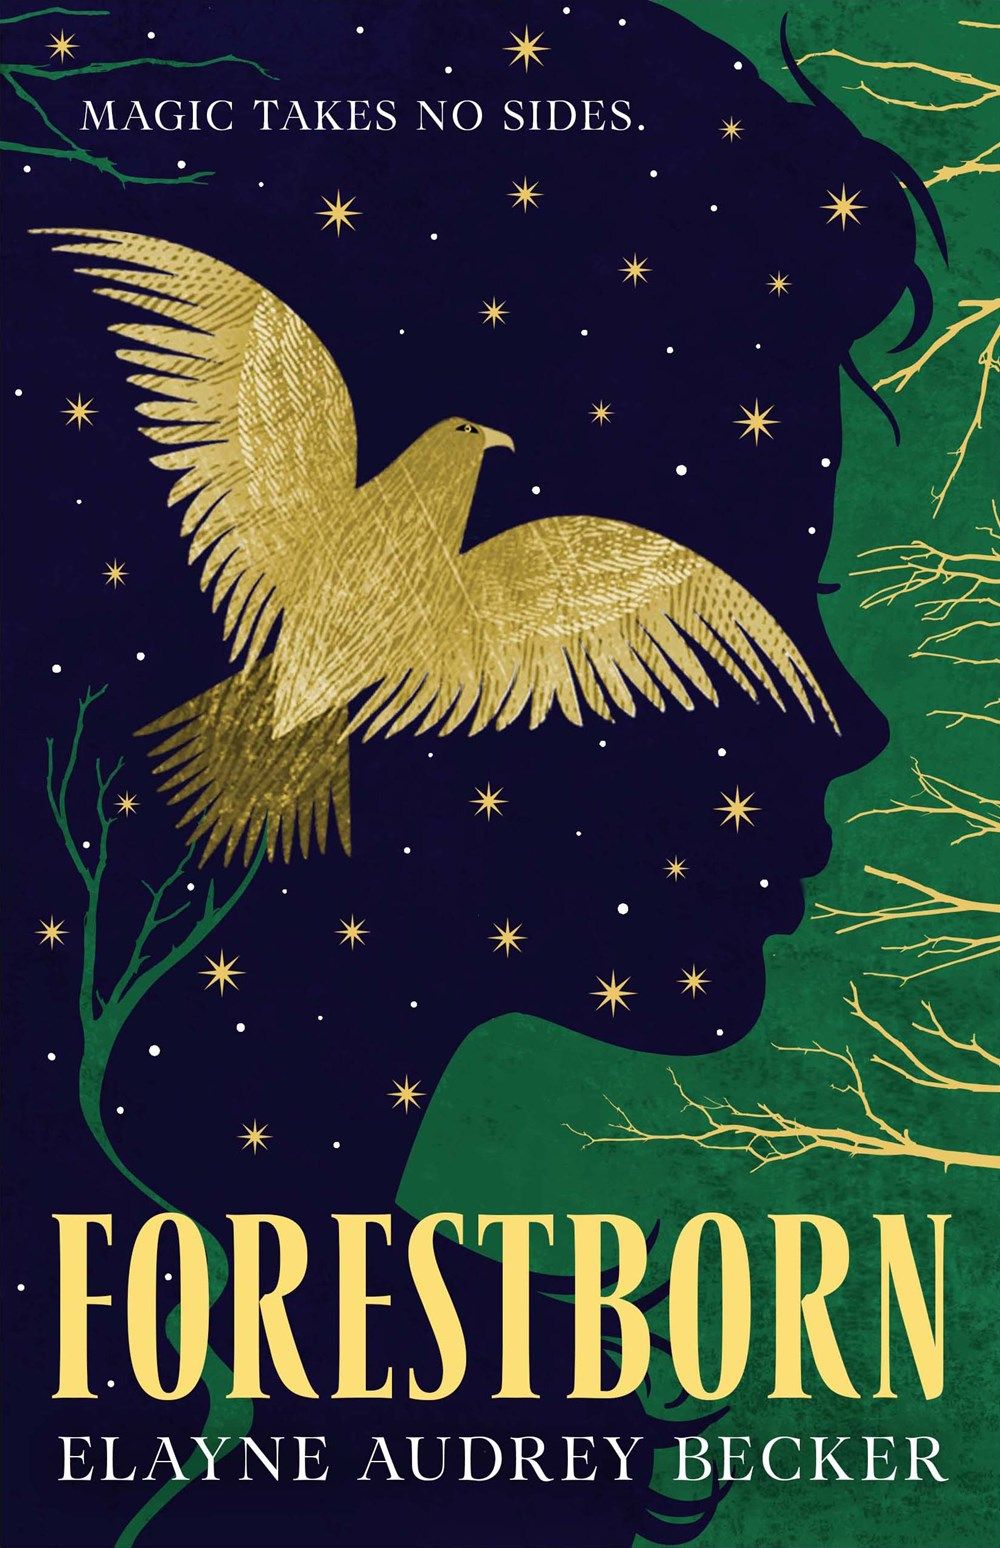 Cover of Forestborn by Elayne Audrey Becker